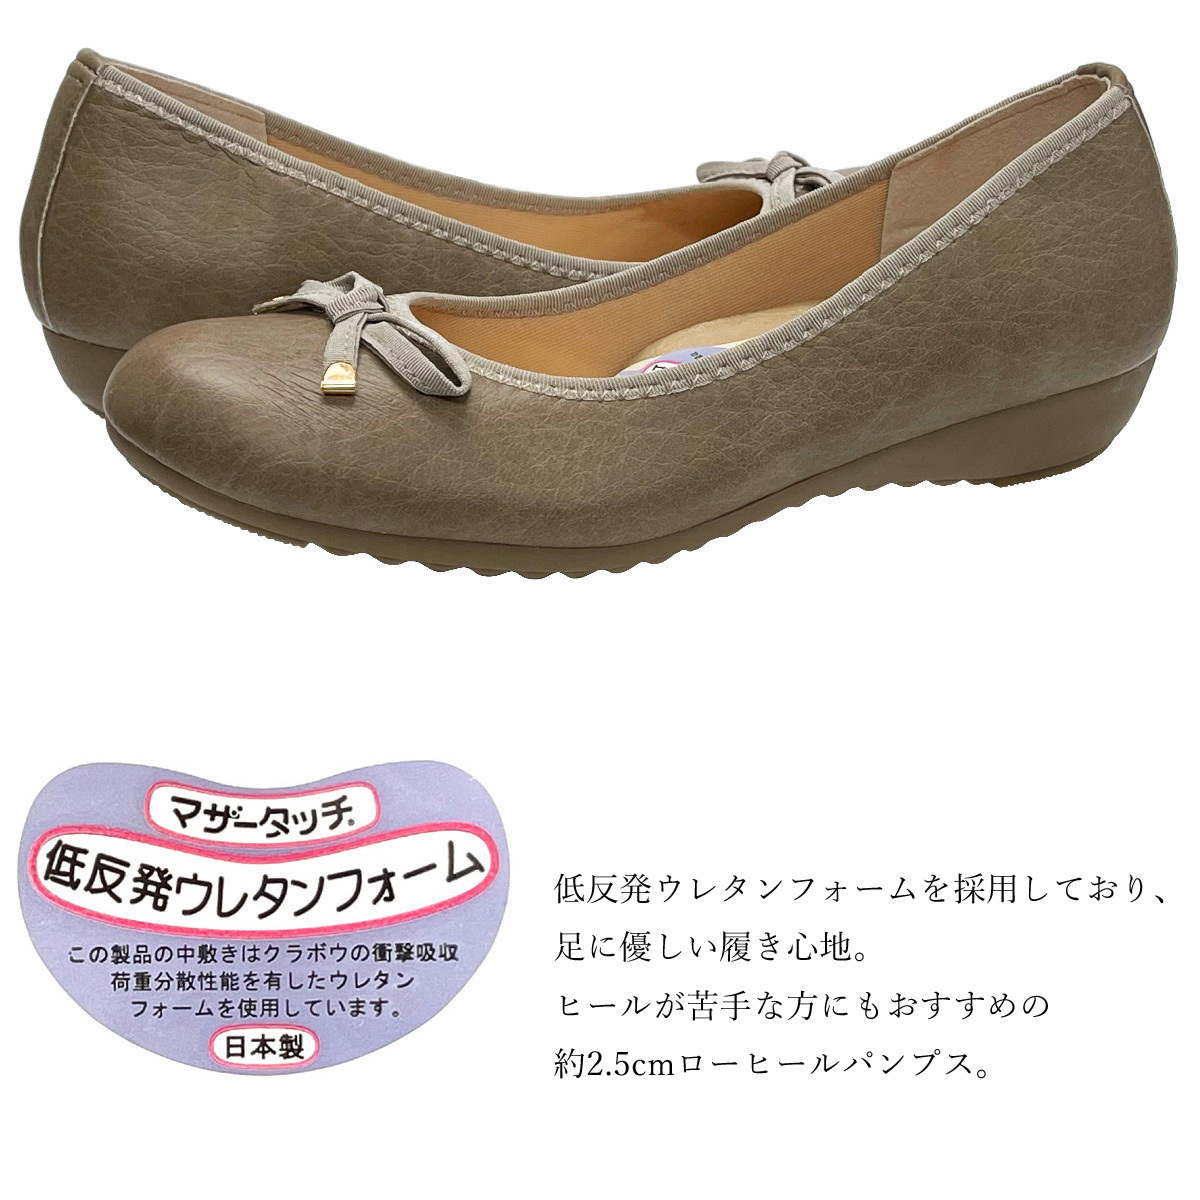 No.39076 oak 24.0cm ARCH CONTACT arch Contact pumps light weight Wedge sole low heel low repulsion cushion shoes 